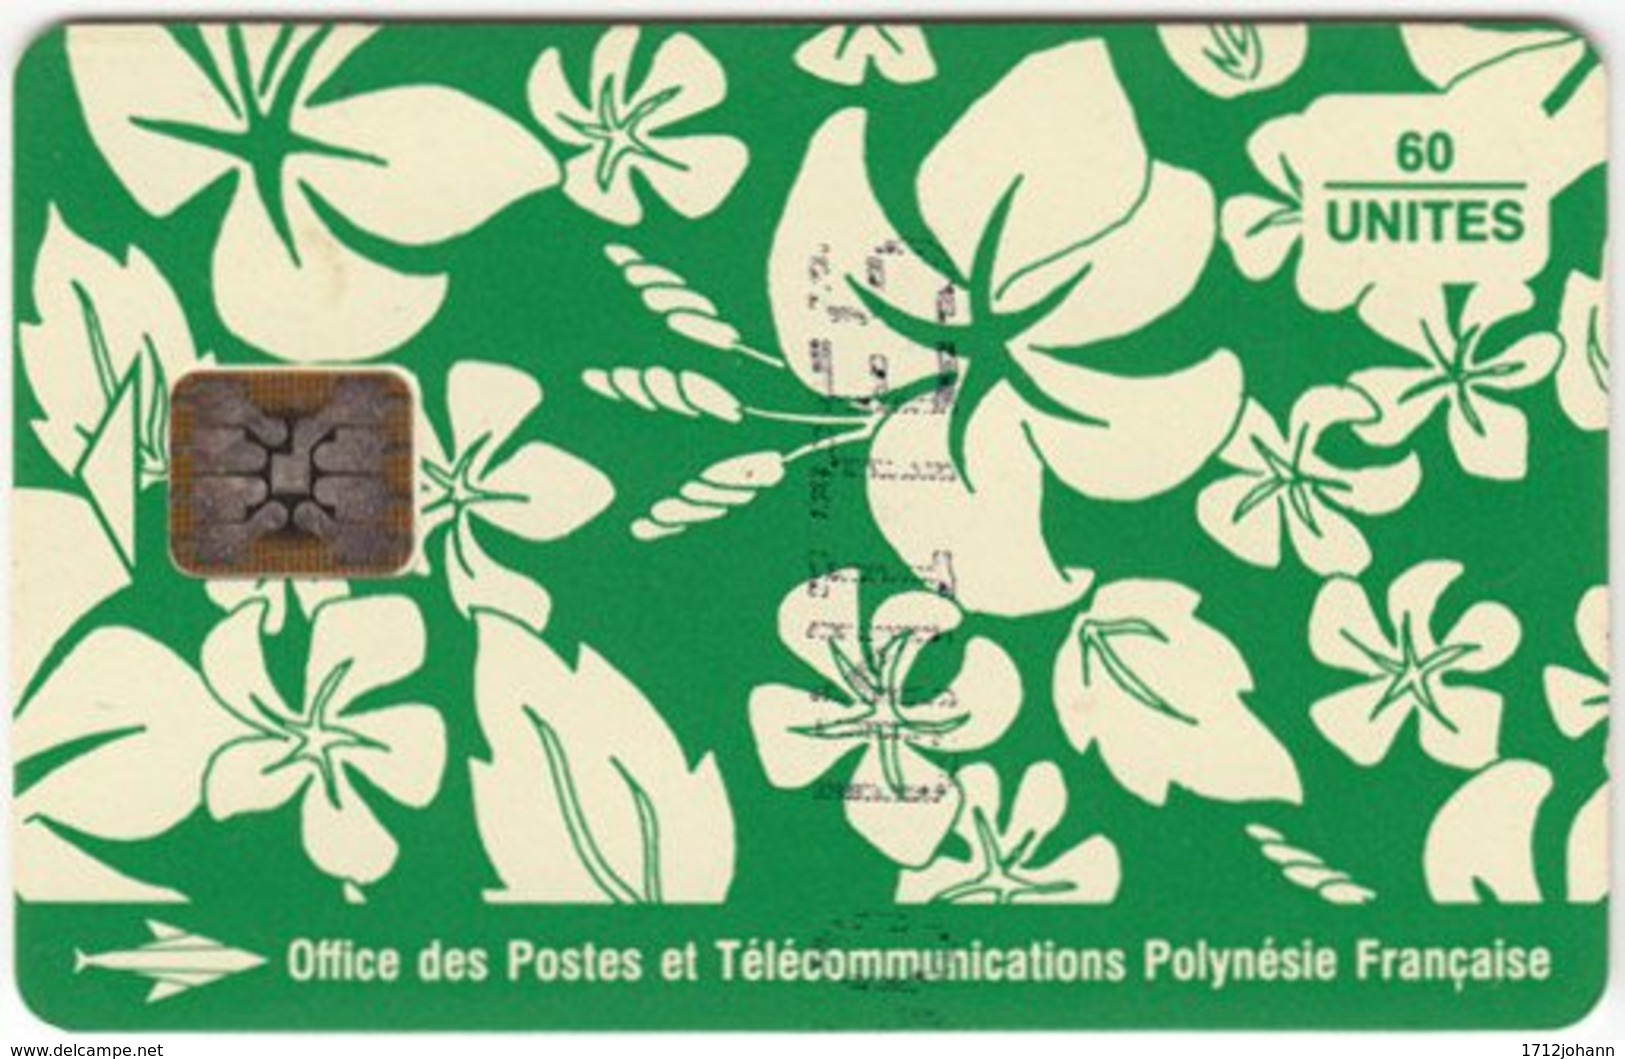 POLYNESIA A-018 Chip OPT - Painting, Flowers - Used - French Polynesia